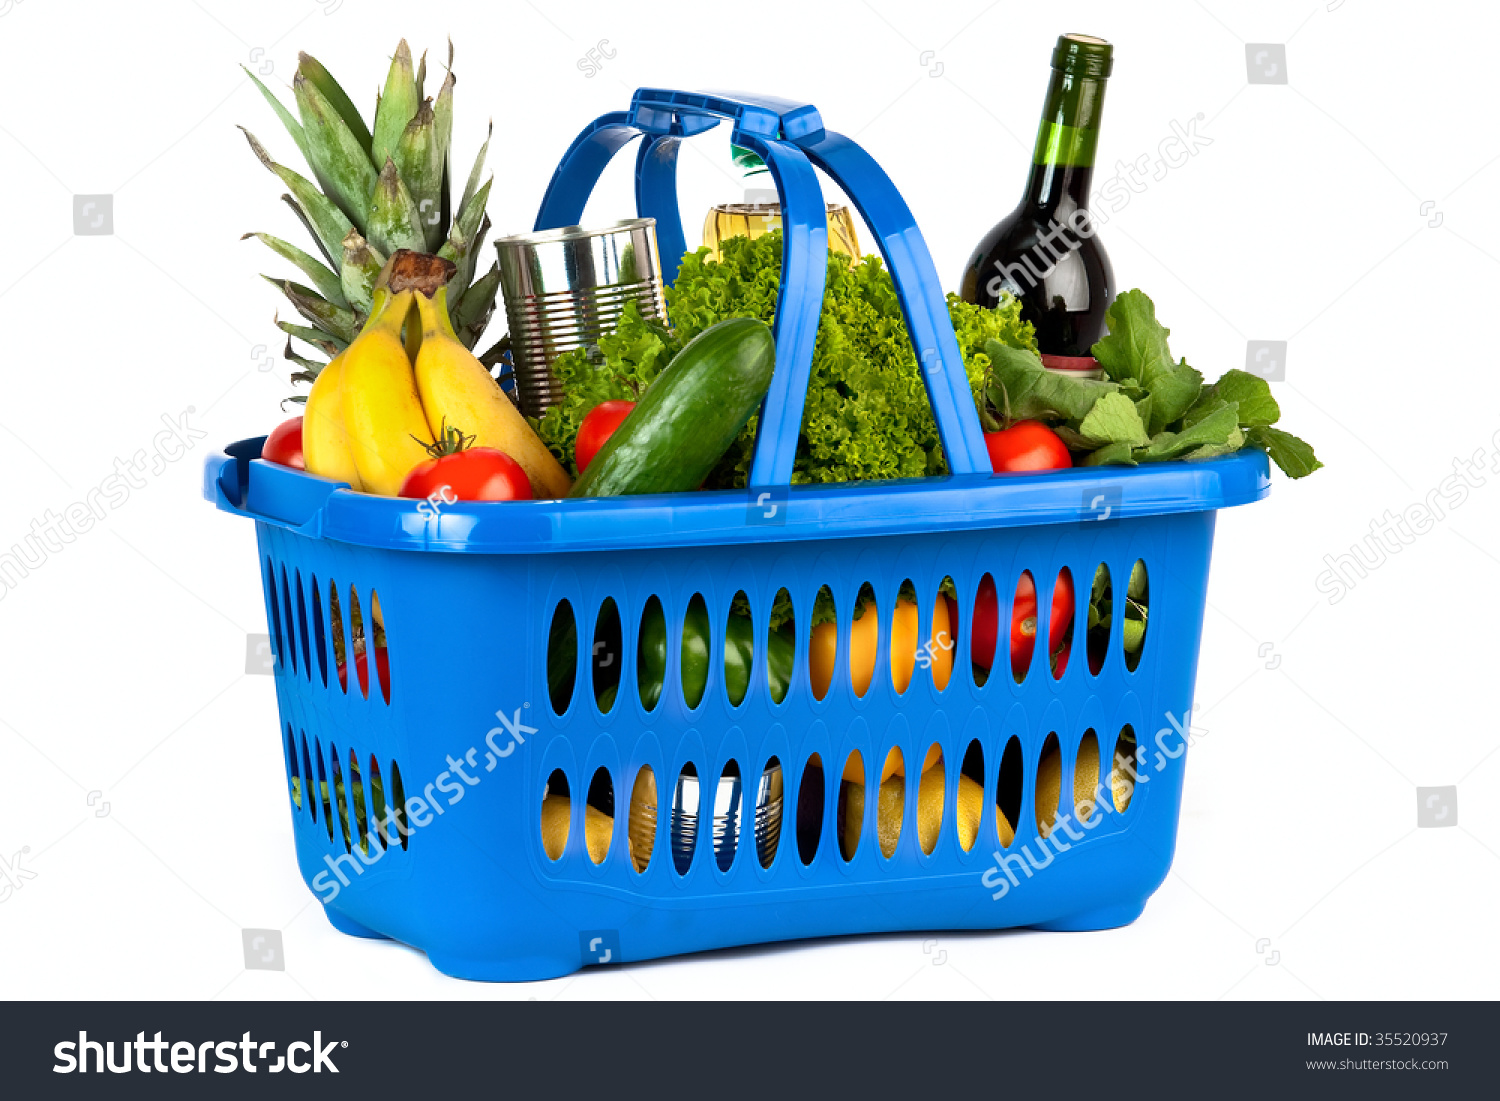 A blue plastic shopping basket on a white background filled with groceries. #35520937